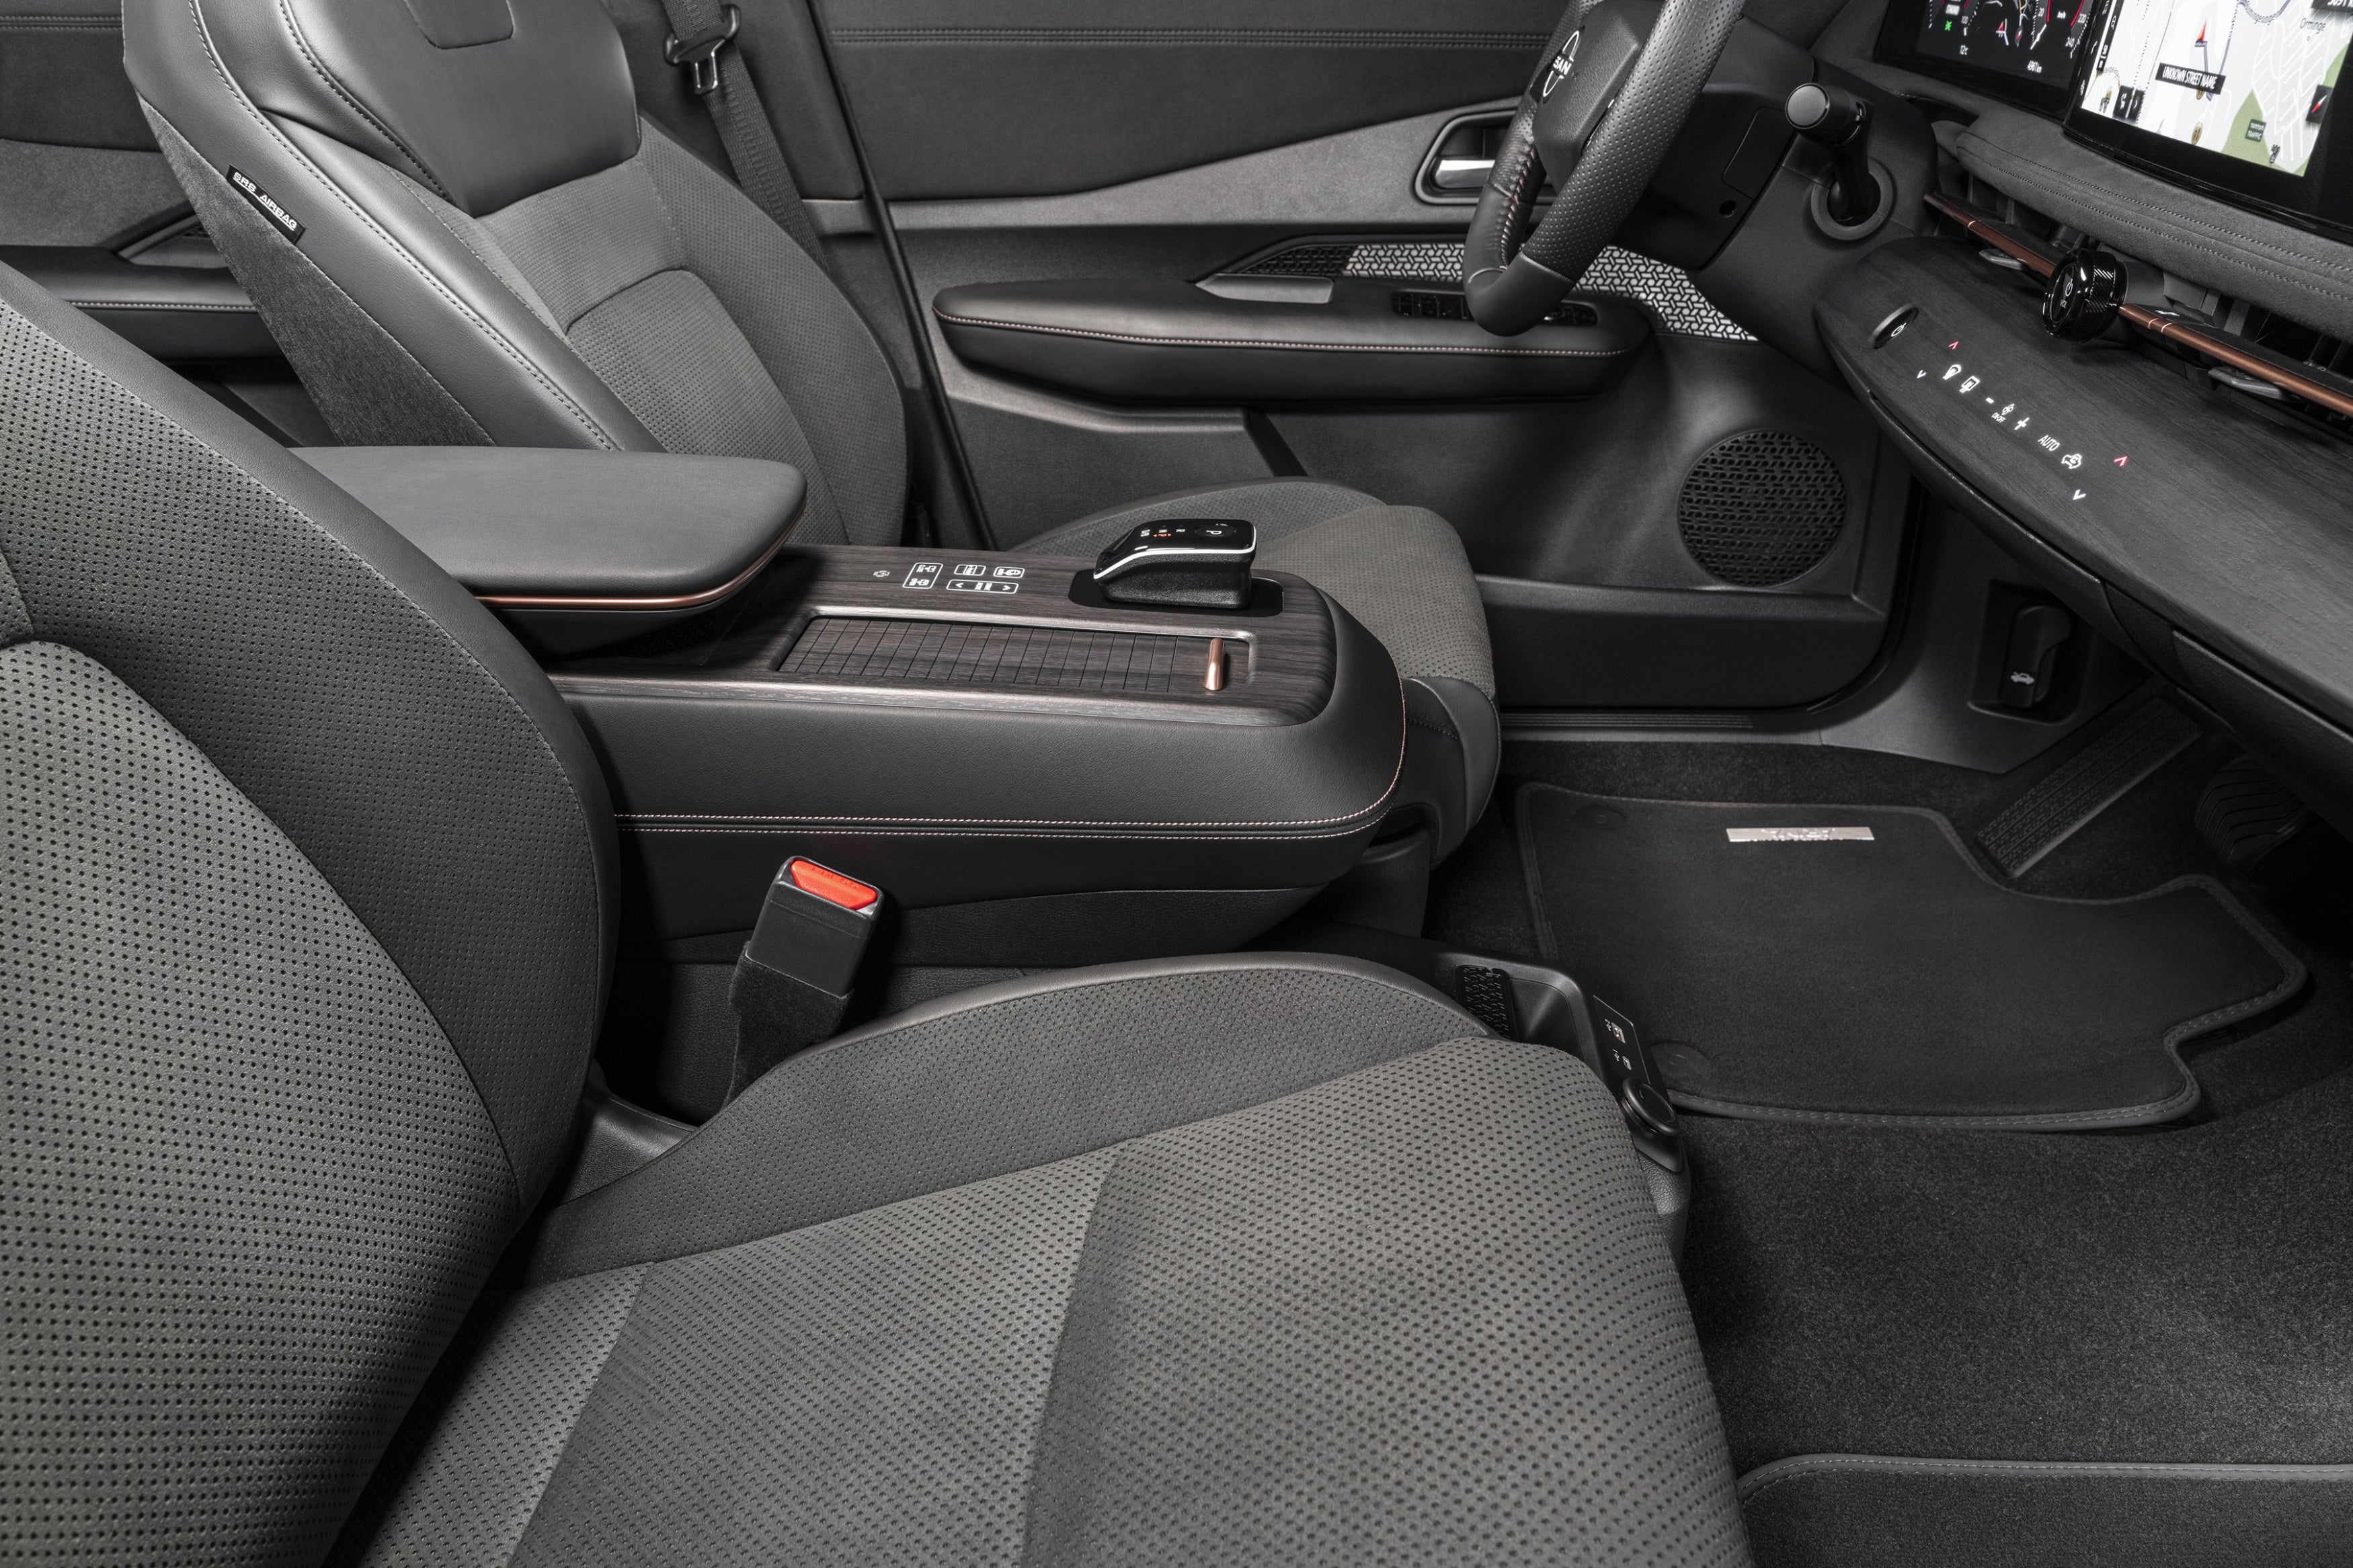 Among its electrically-driven comforts is a centre console that unusually slides forward and back